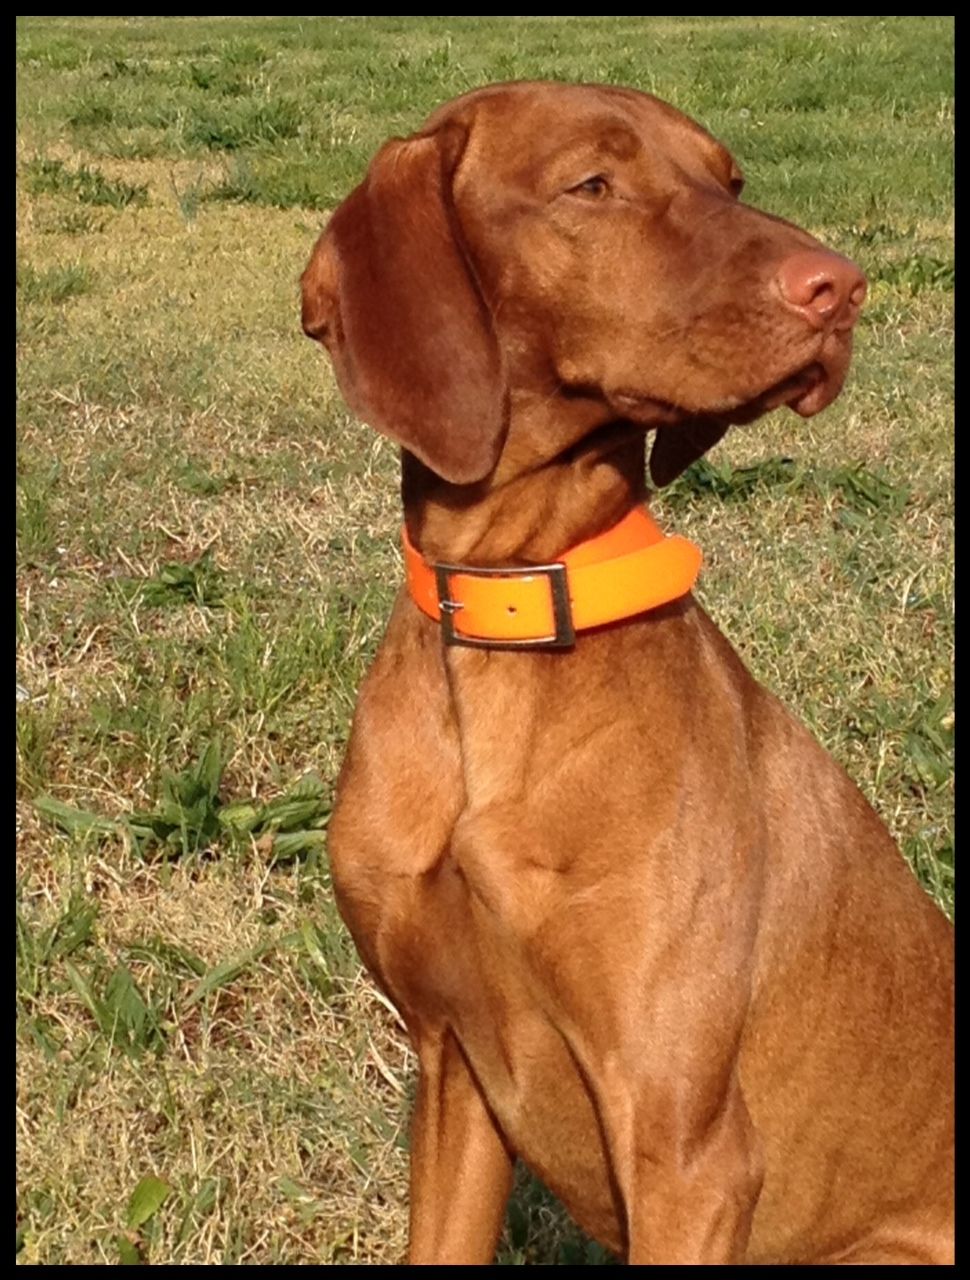 what does an orange collar on a dog mean